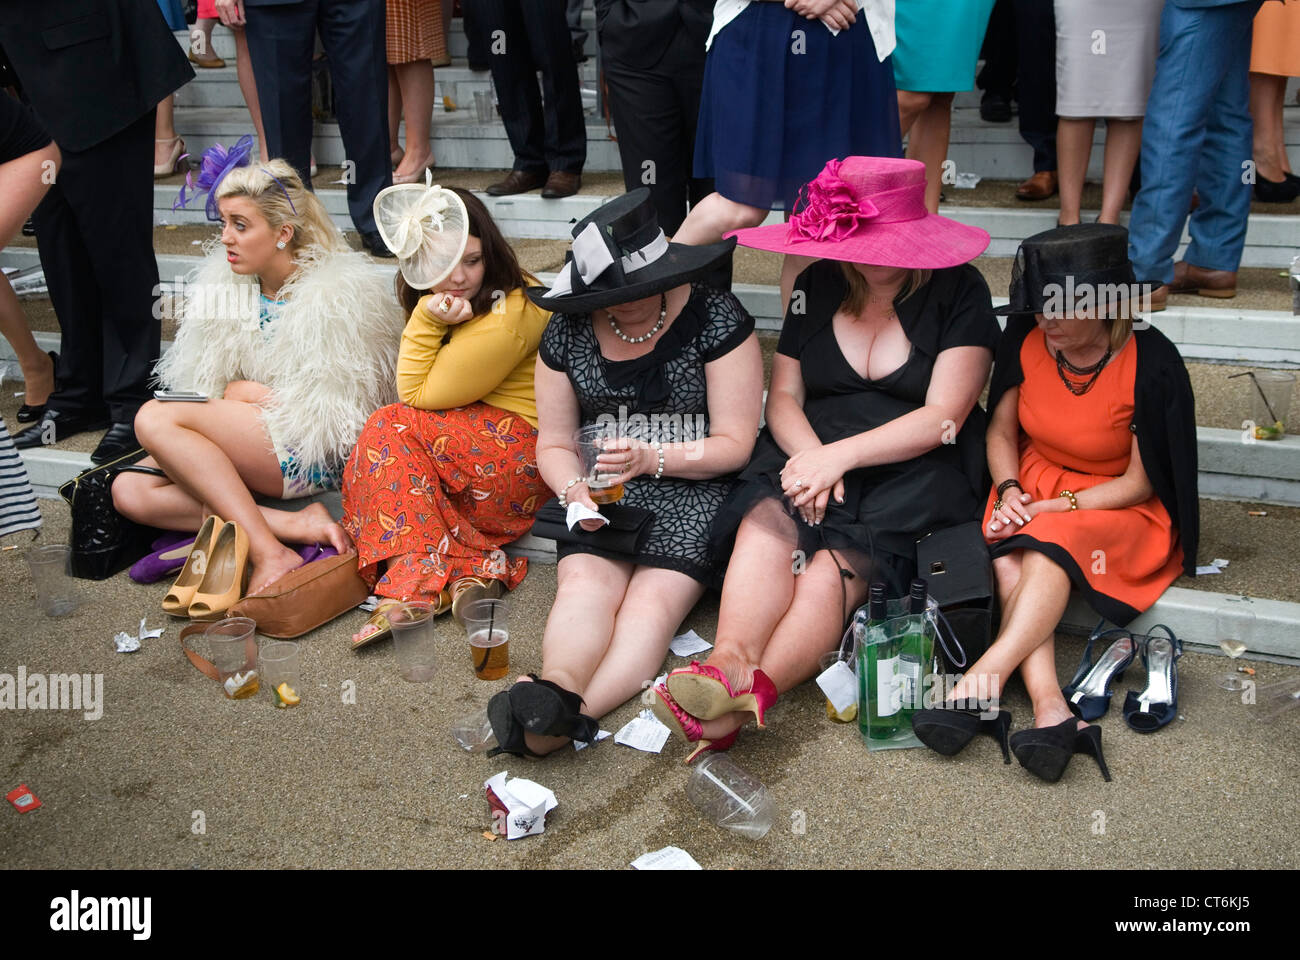 Tired exhausted, sore feet, worn out, uncomfortable shoes, group of women sitting down  and looking at their feet. 2012 2010s UK HOMER SYKES Stock Photo